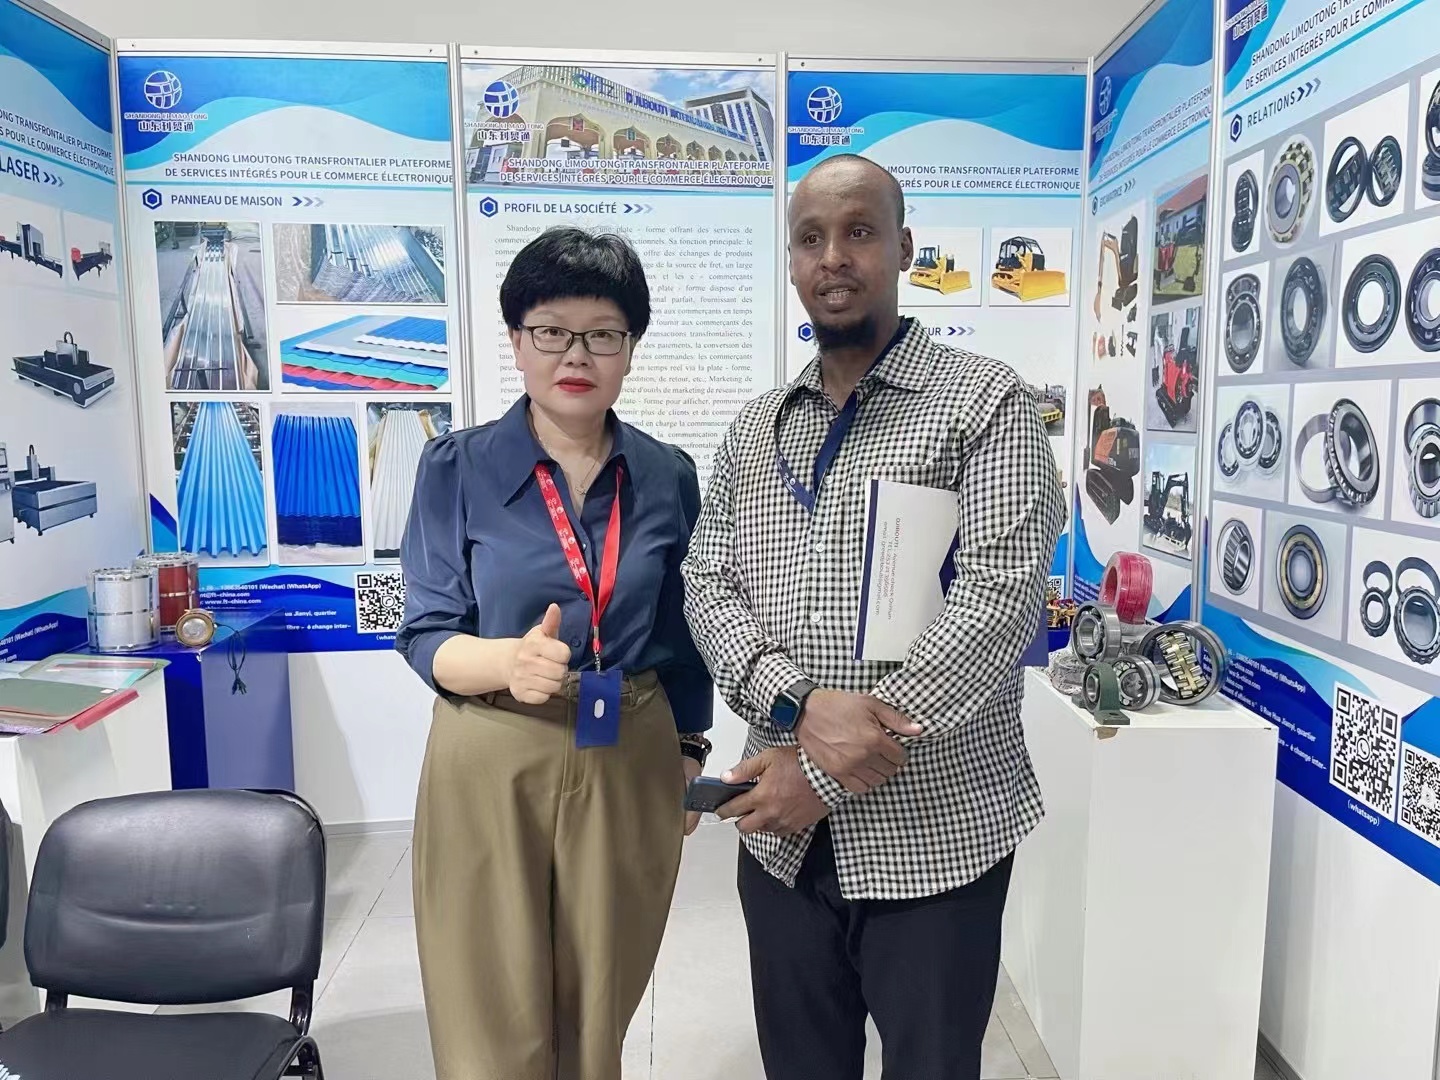 Shandong Limaotong cross-border e-commerce and foreign trade integrated service platform participated in the Djibouti exhibition to help Liaocheng Manufacturing explore the international market